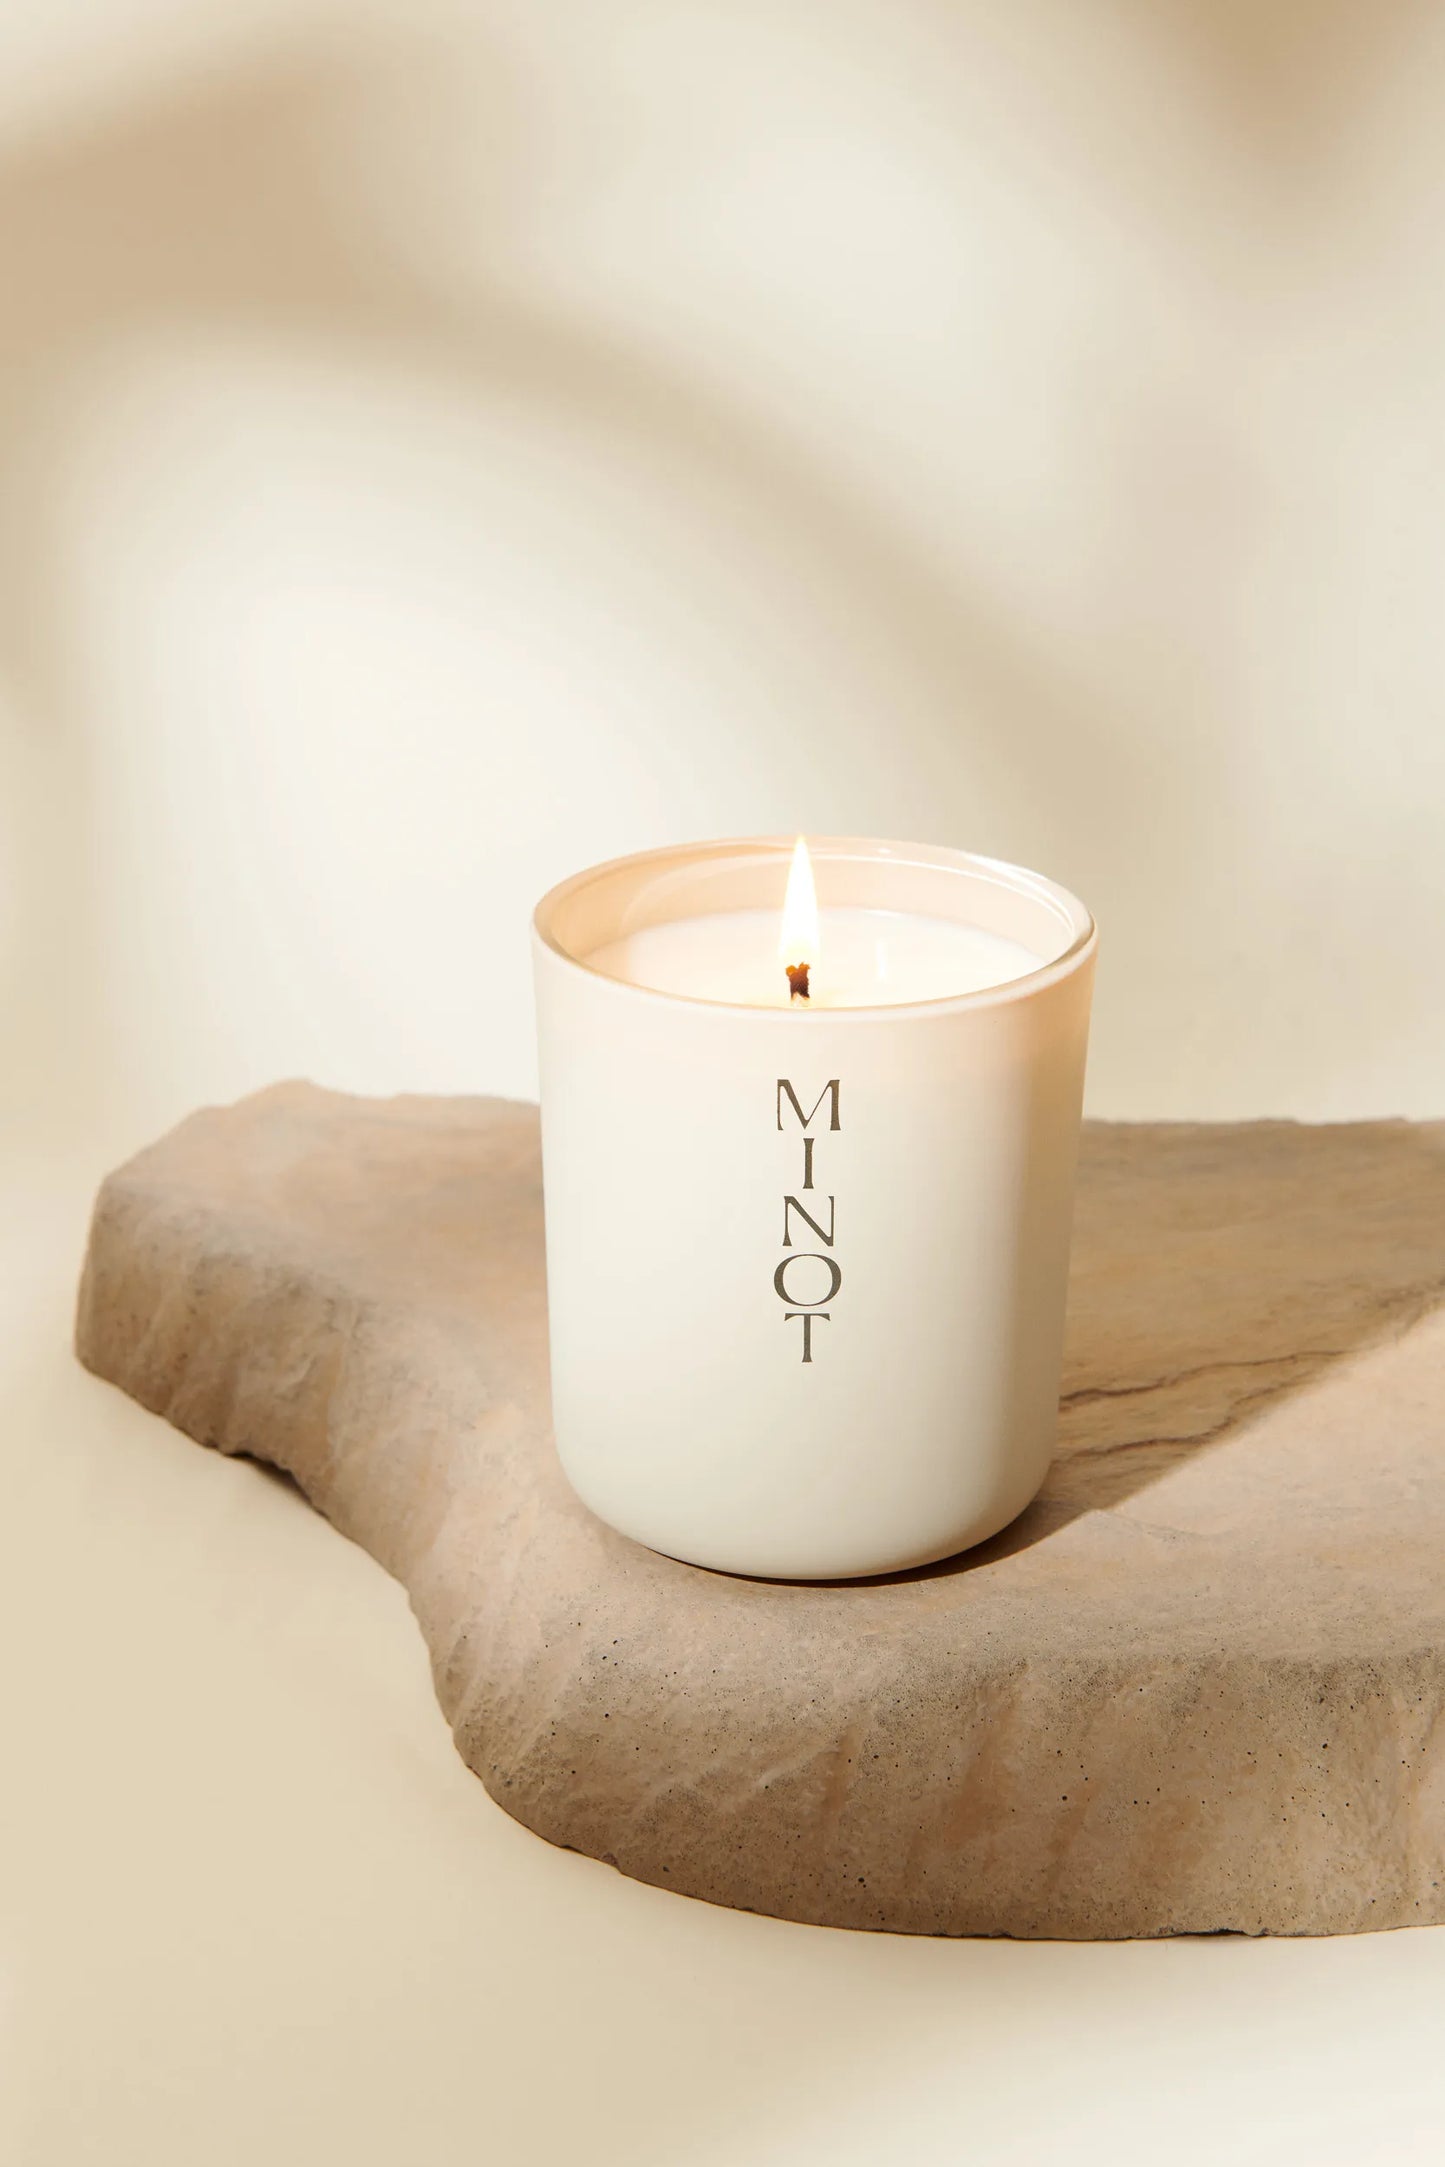 Luna is a natural, non-toxic candle with sensual and sultry mandarin, sandalwood, and jasmine scents